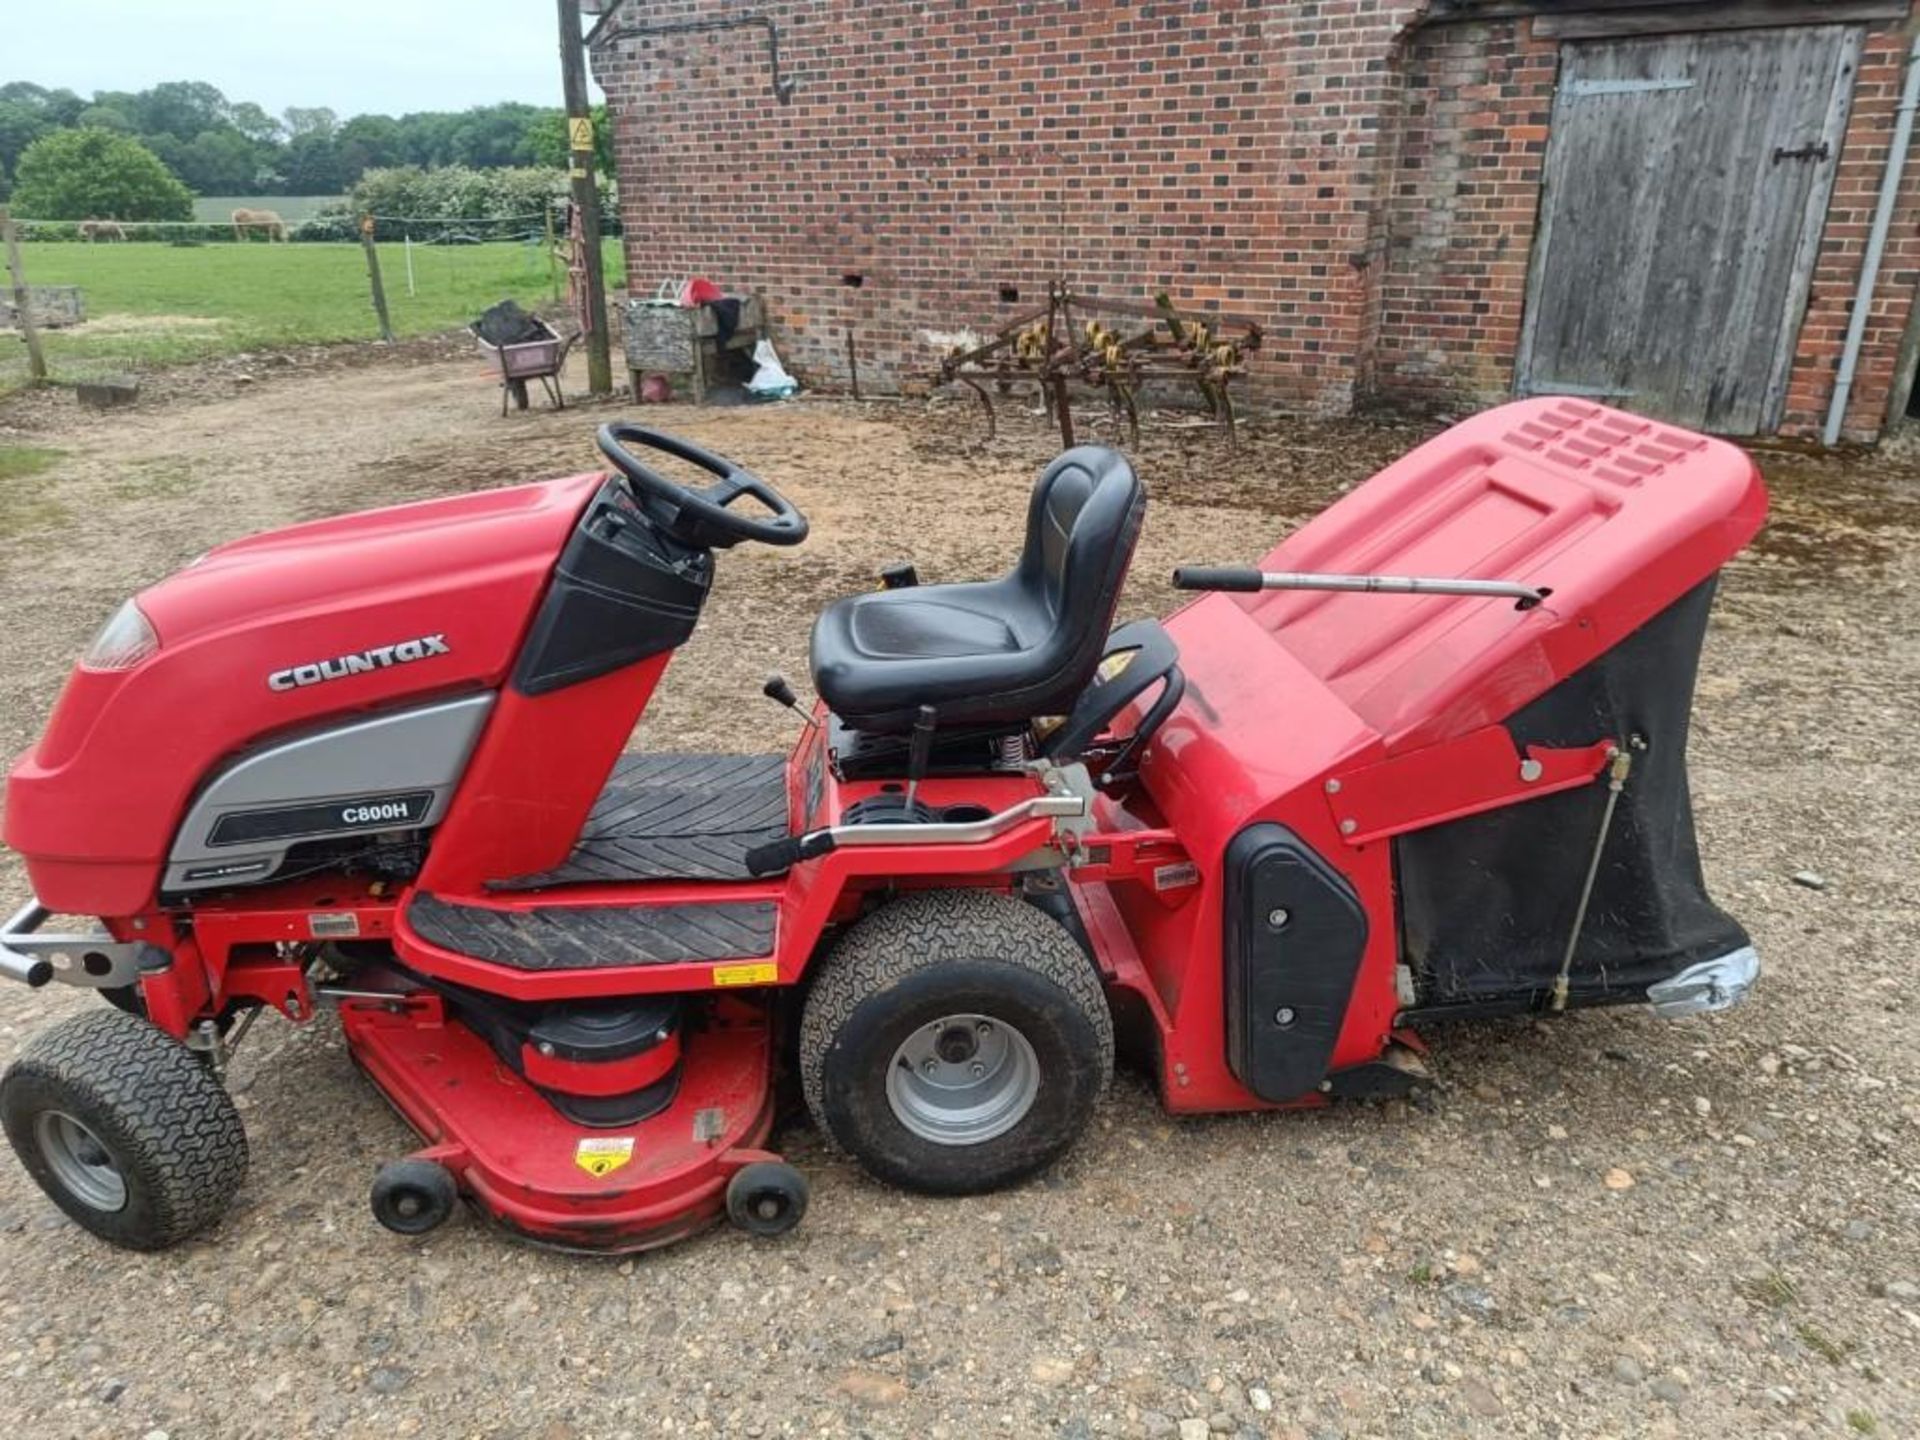 Countax C800H Ride On Mower - Image 2 of 5